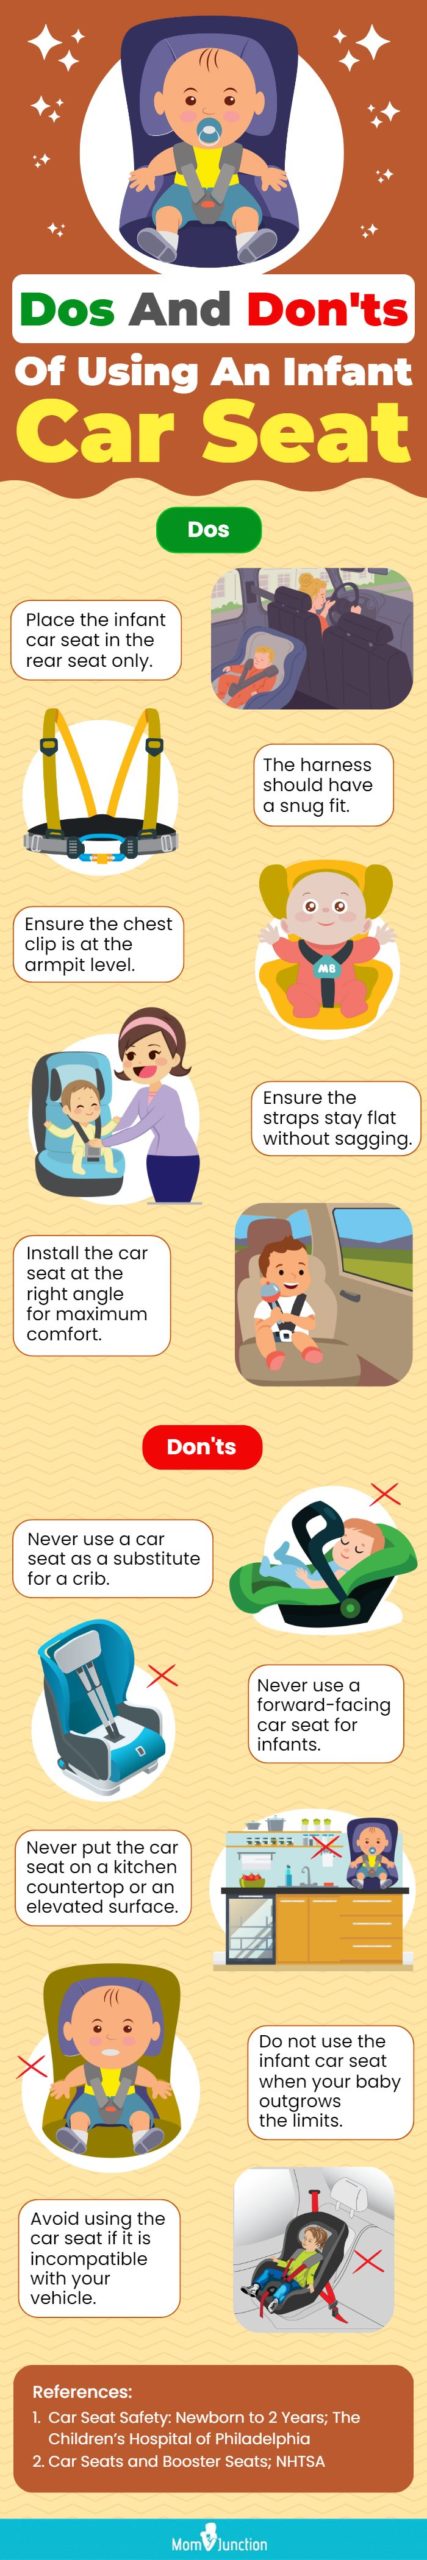 Dos And Don'ts Of Using An Infant Car Seat (infographic)